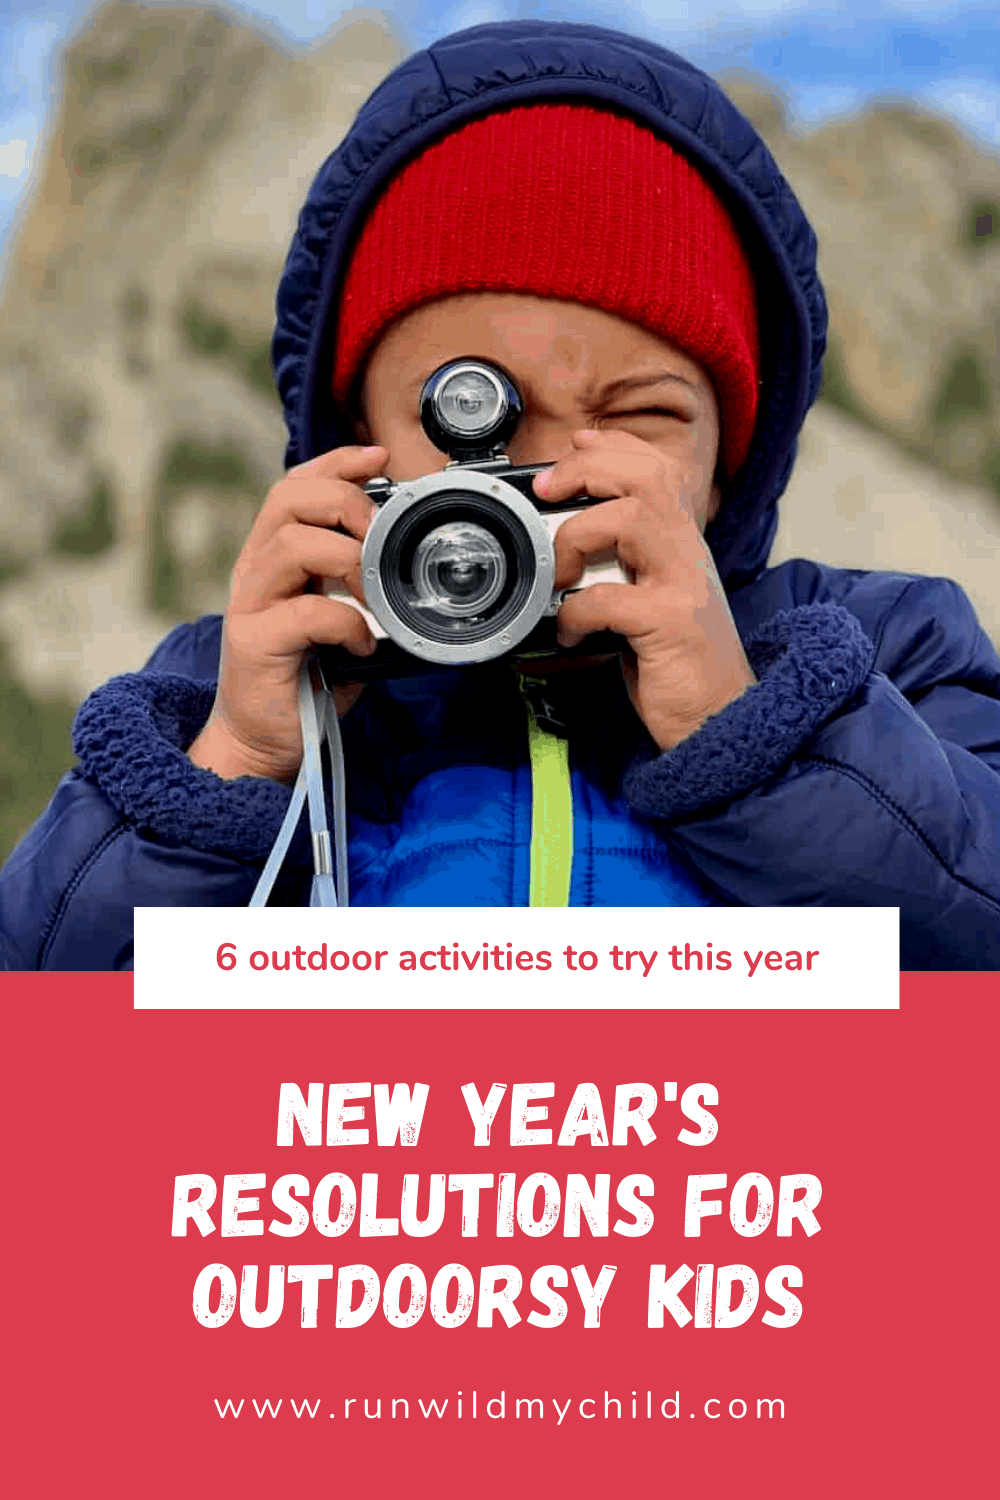 New Year's Resolutions for Outdoorsy Kids - activities to try and skills to learn this year